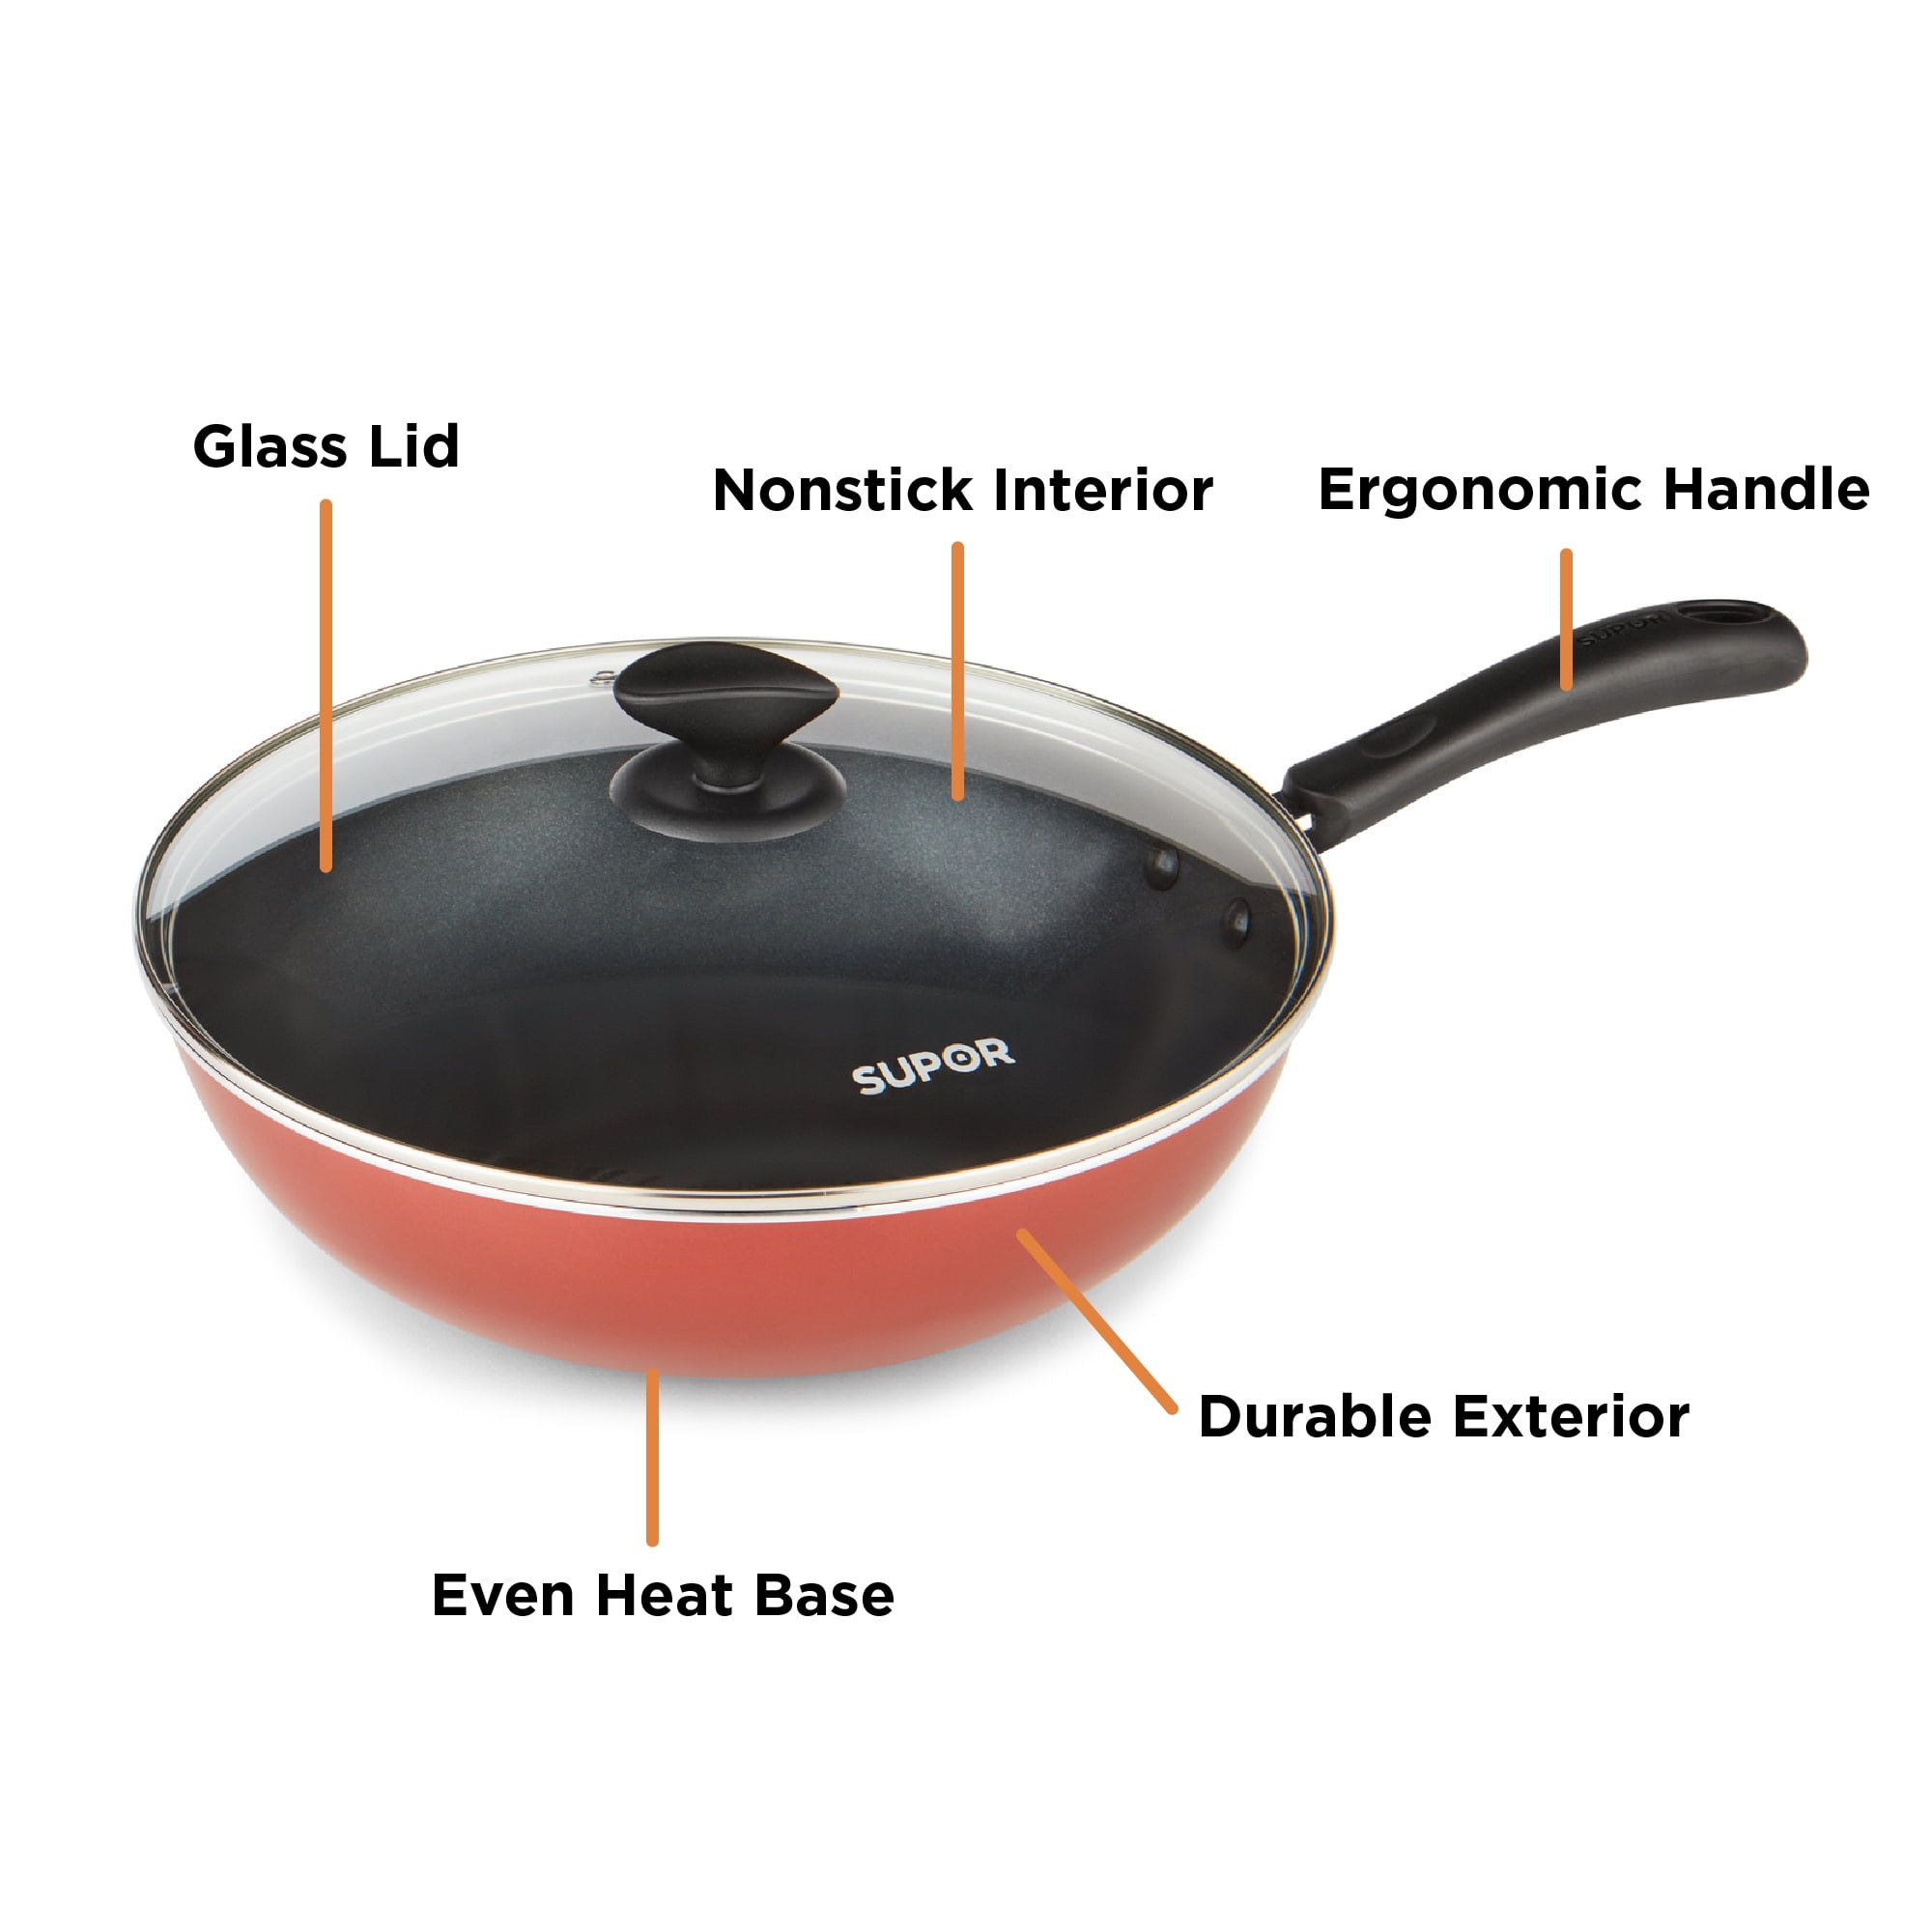  Homaz life 12 Inch Nonstick Wok with Glass Lid, Tri